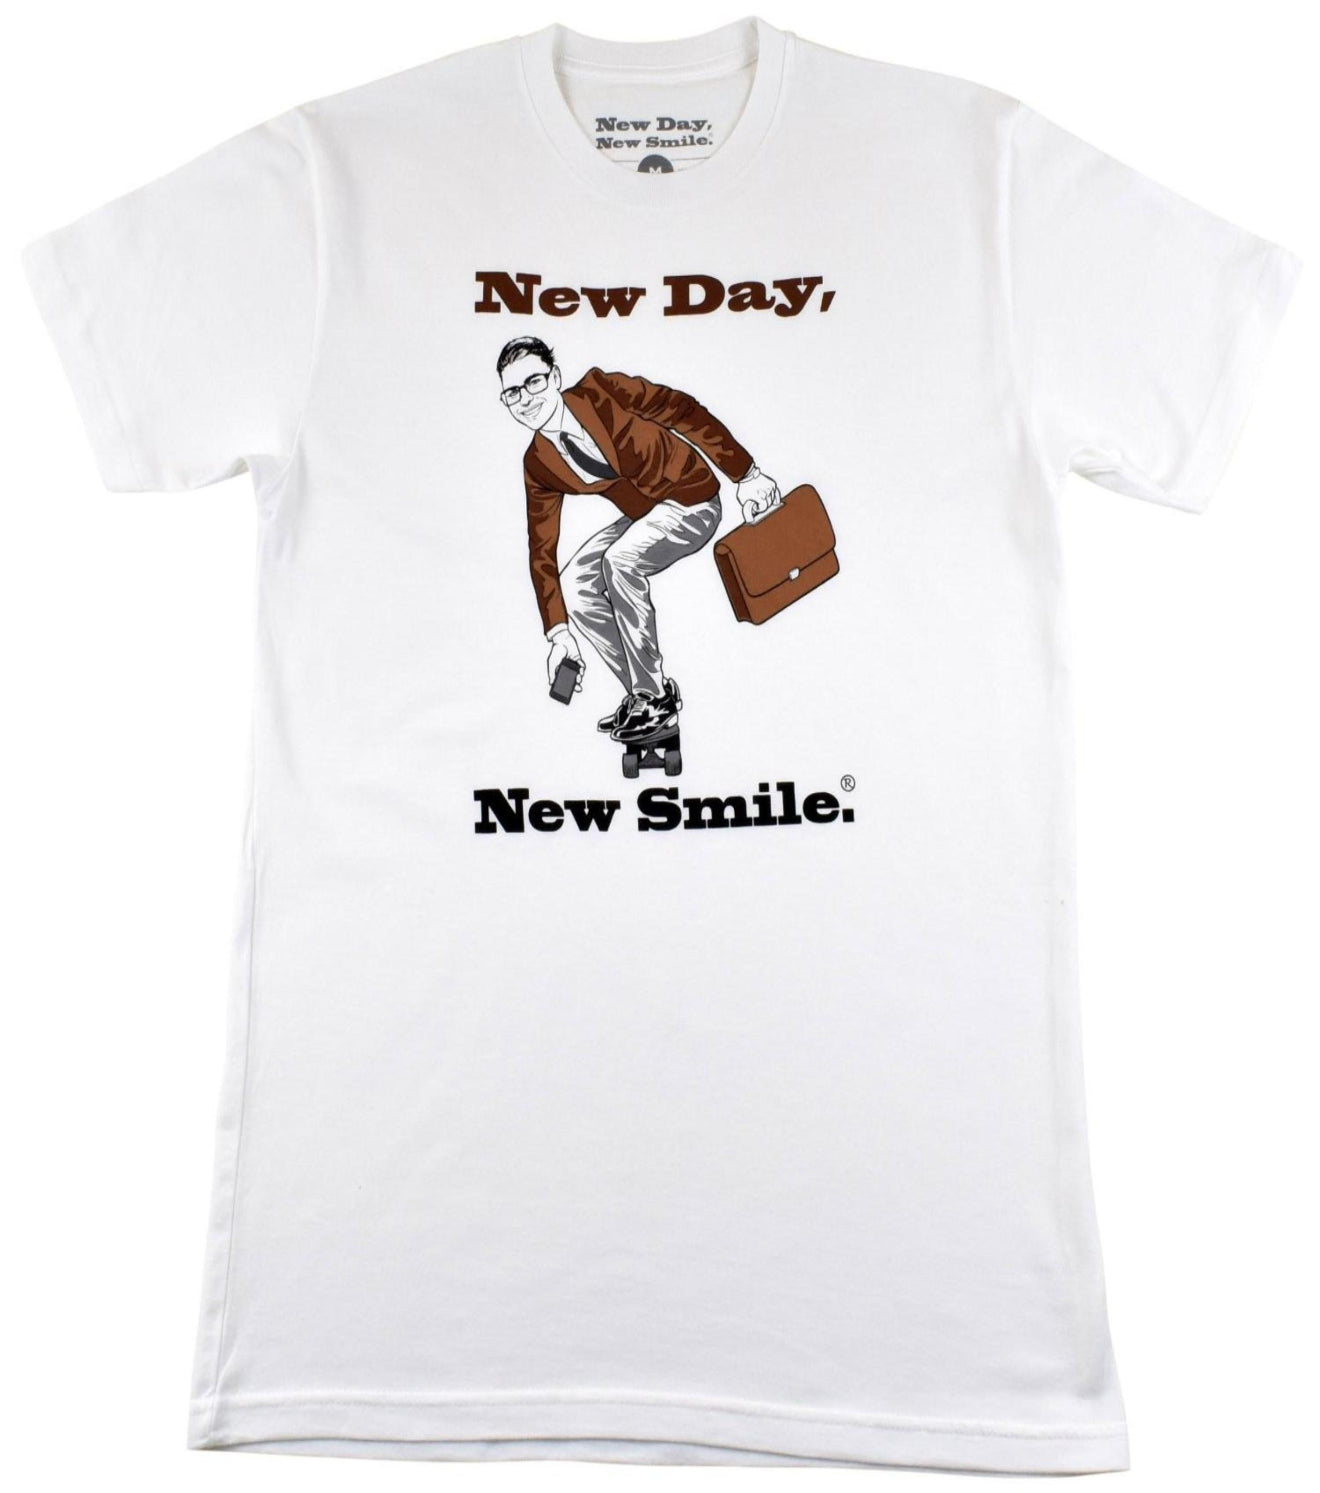 New Day New Smile Men's Businessman On Skateboard T-Shirt available at NewDayNewSmile.come Sofa Holding The Family Photo Men's Tee | available at NewDayNewSmile.com|